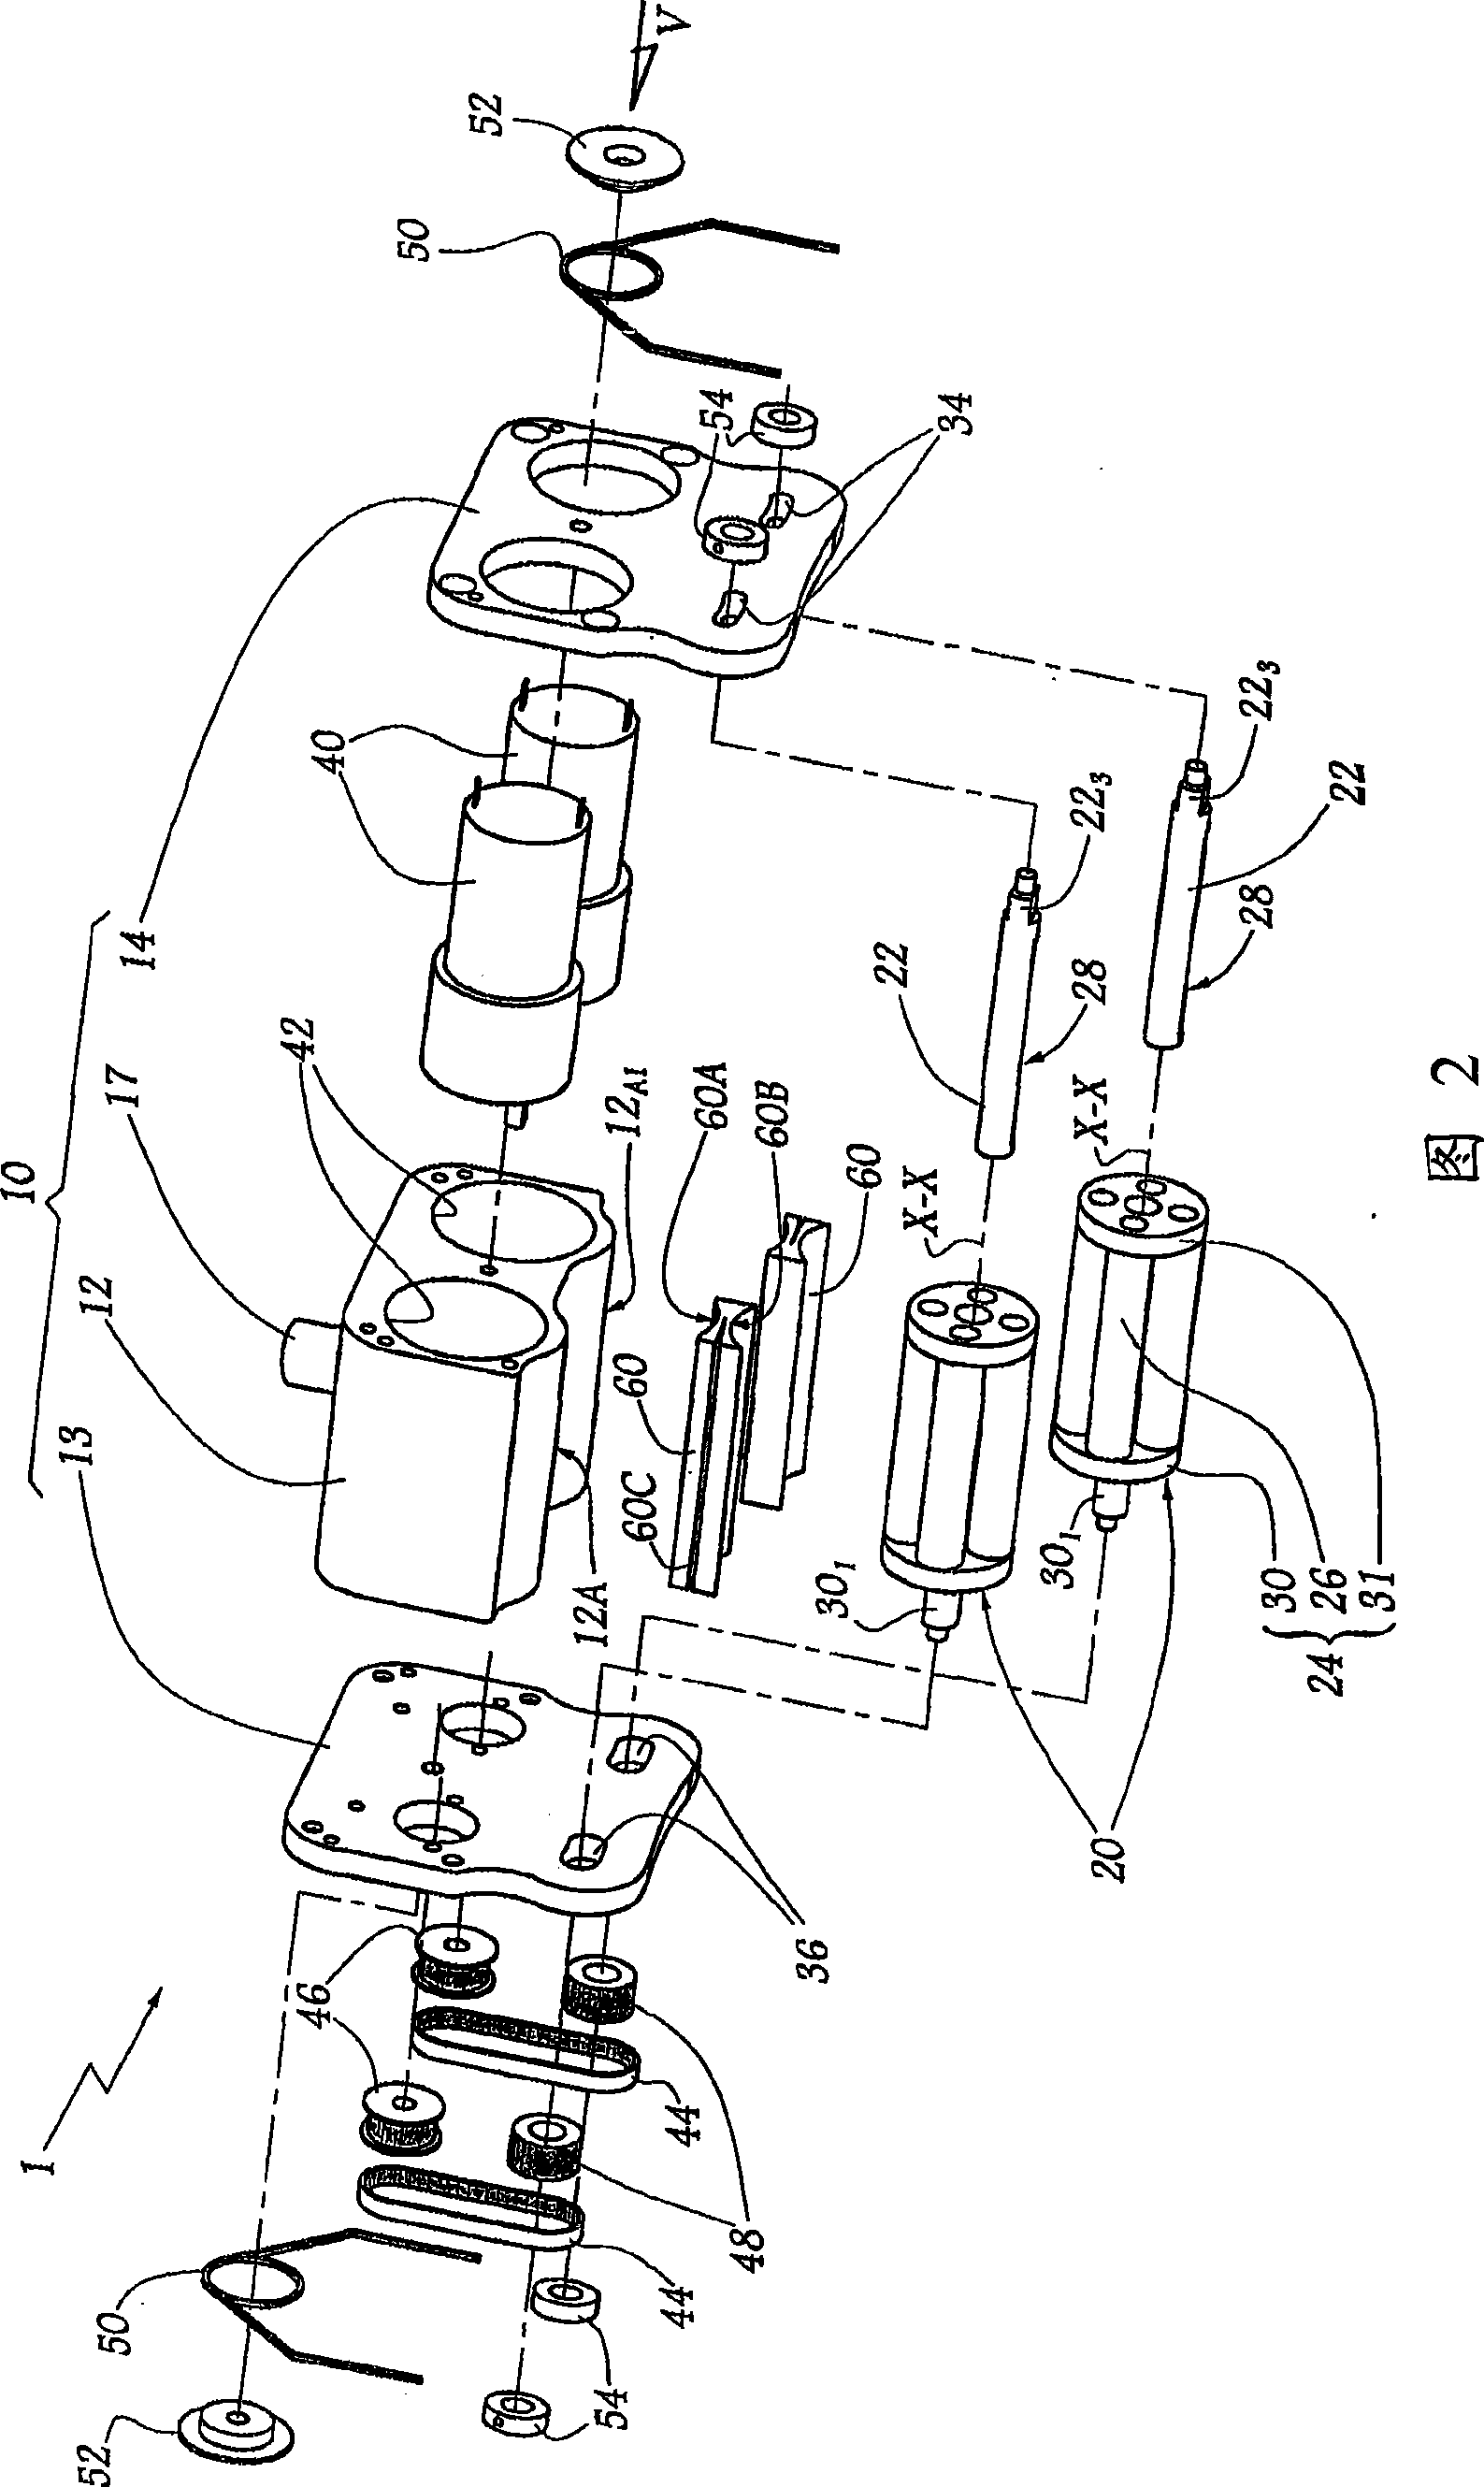 Device for treating, in particular massaging, the connective tissue of the skin